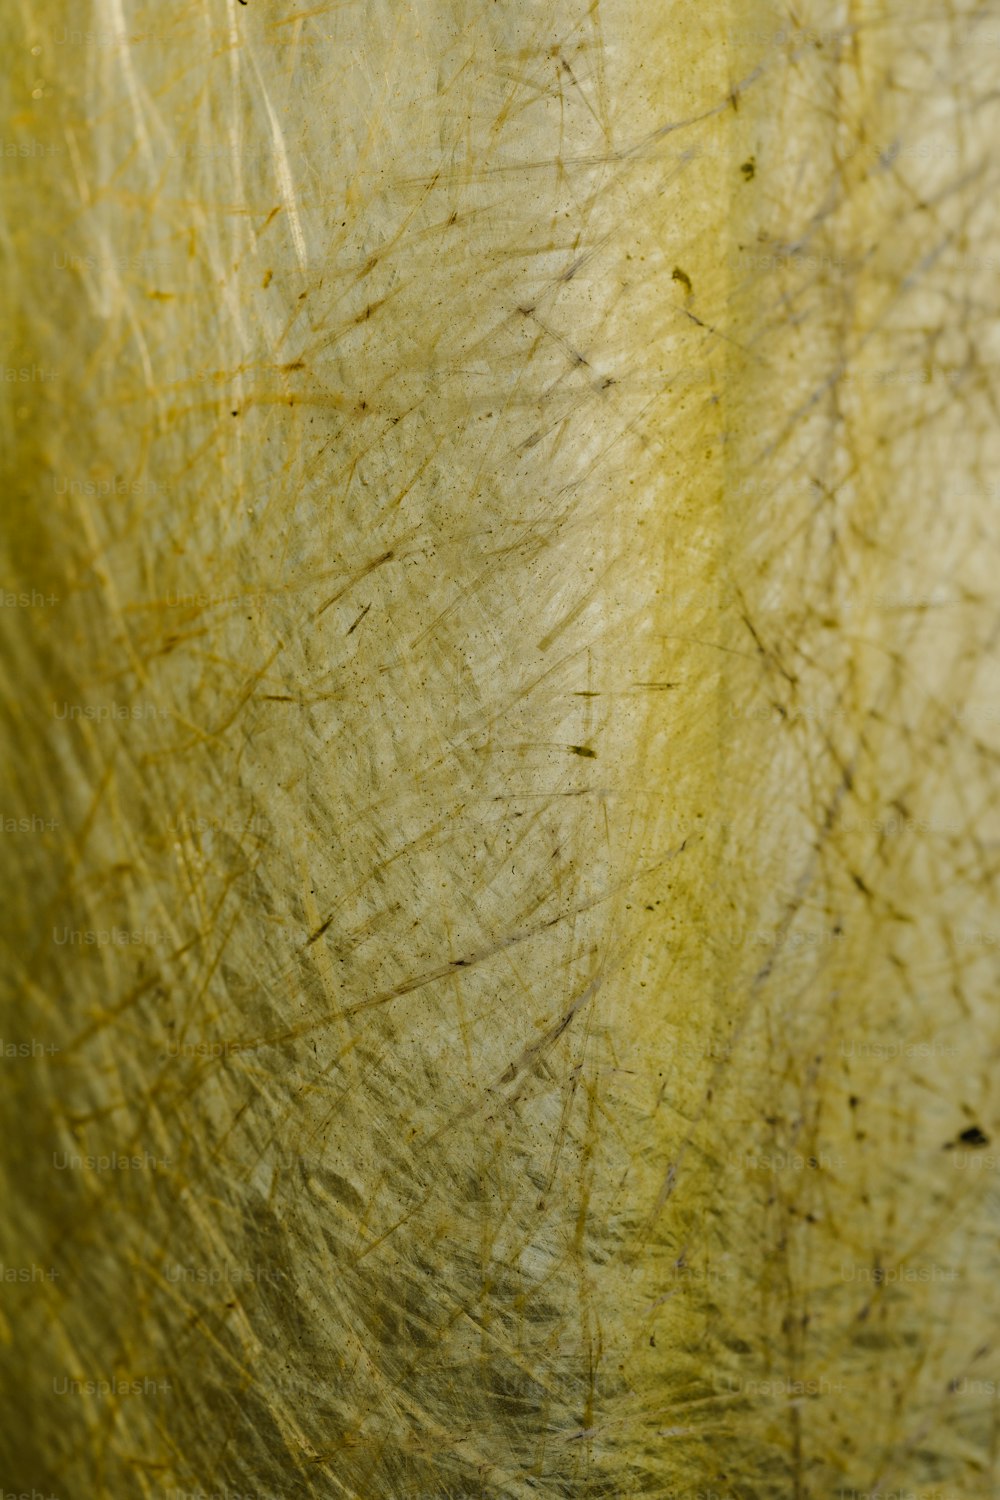 a close up view of a piece of cloth